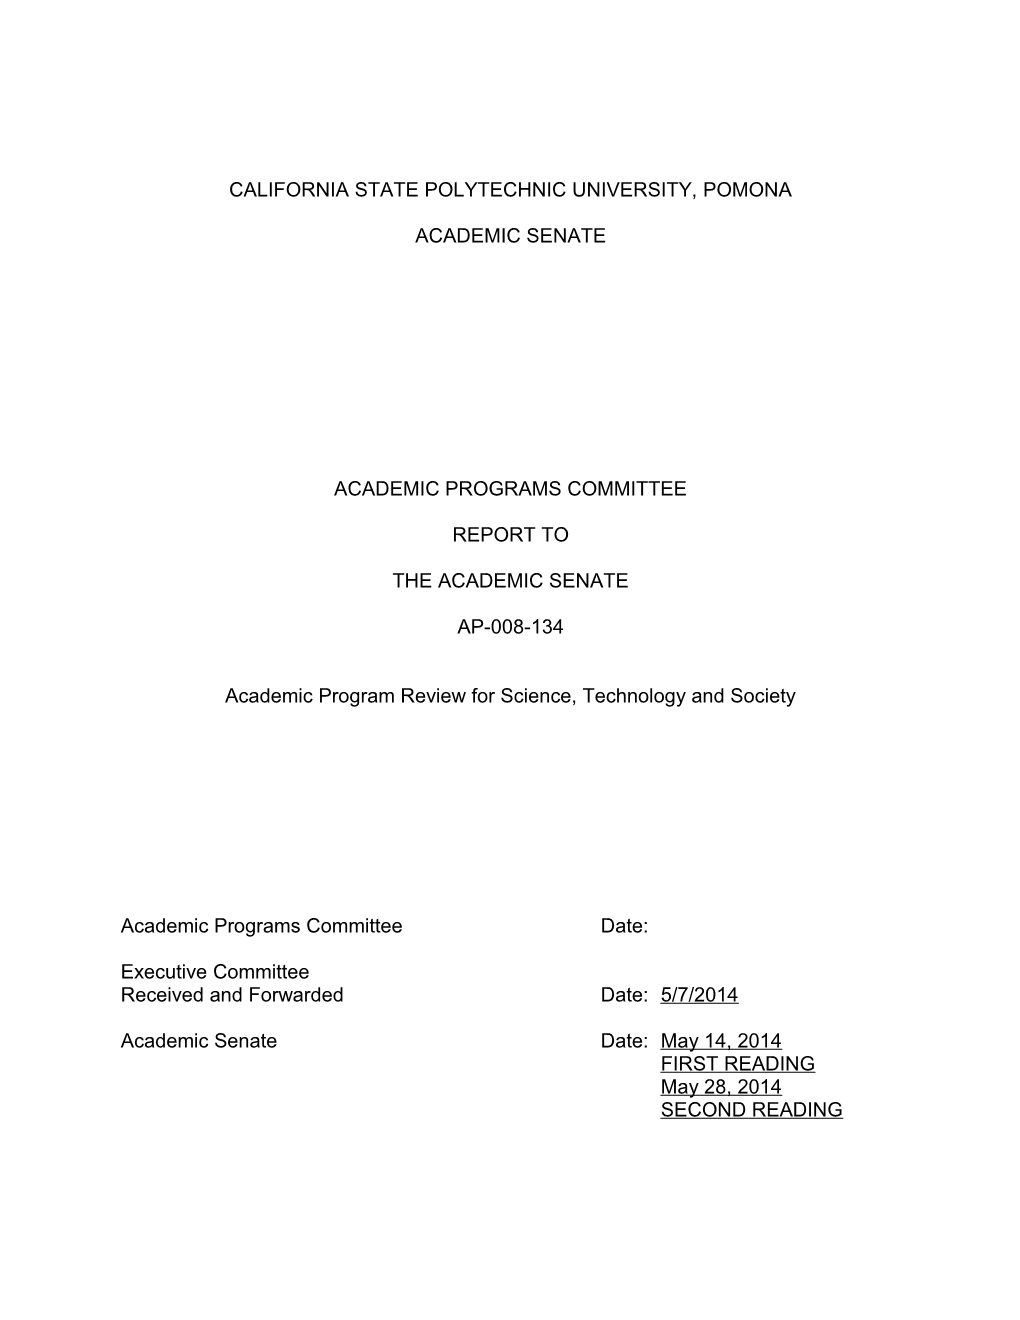 AP-008-134, Academic Program Review for Science, Technology and Society 1